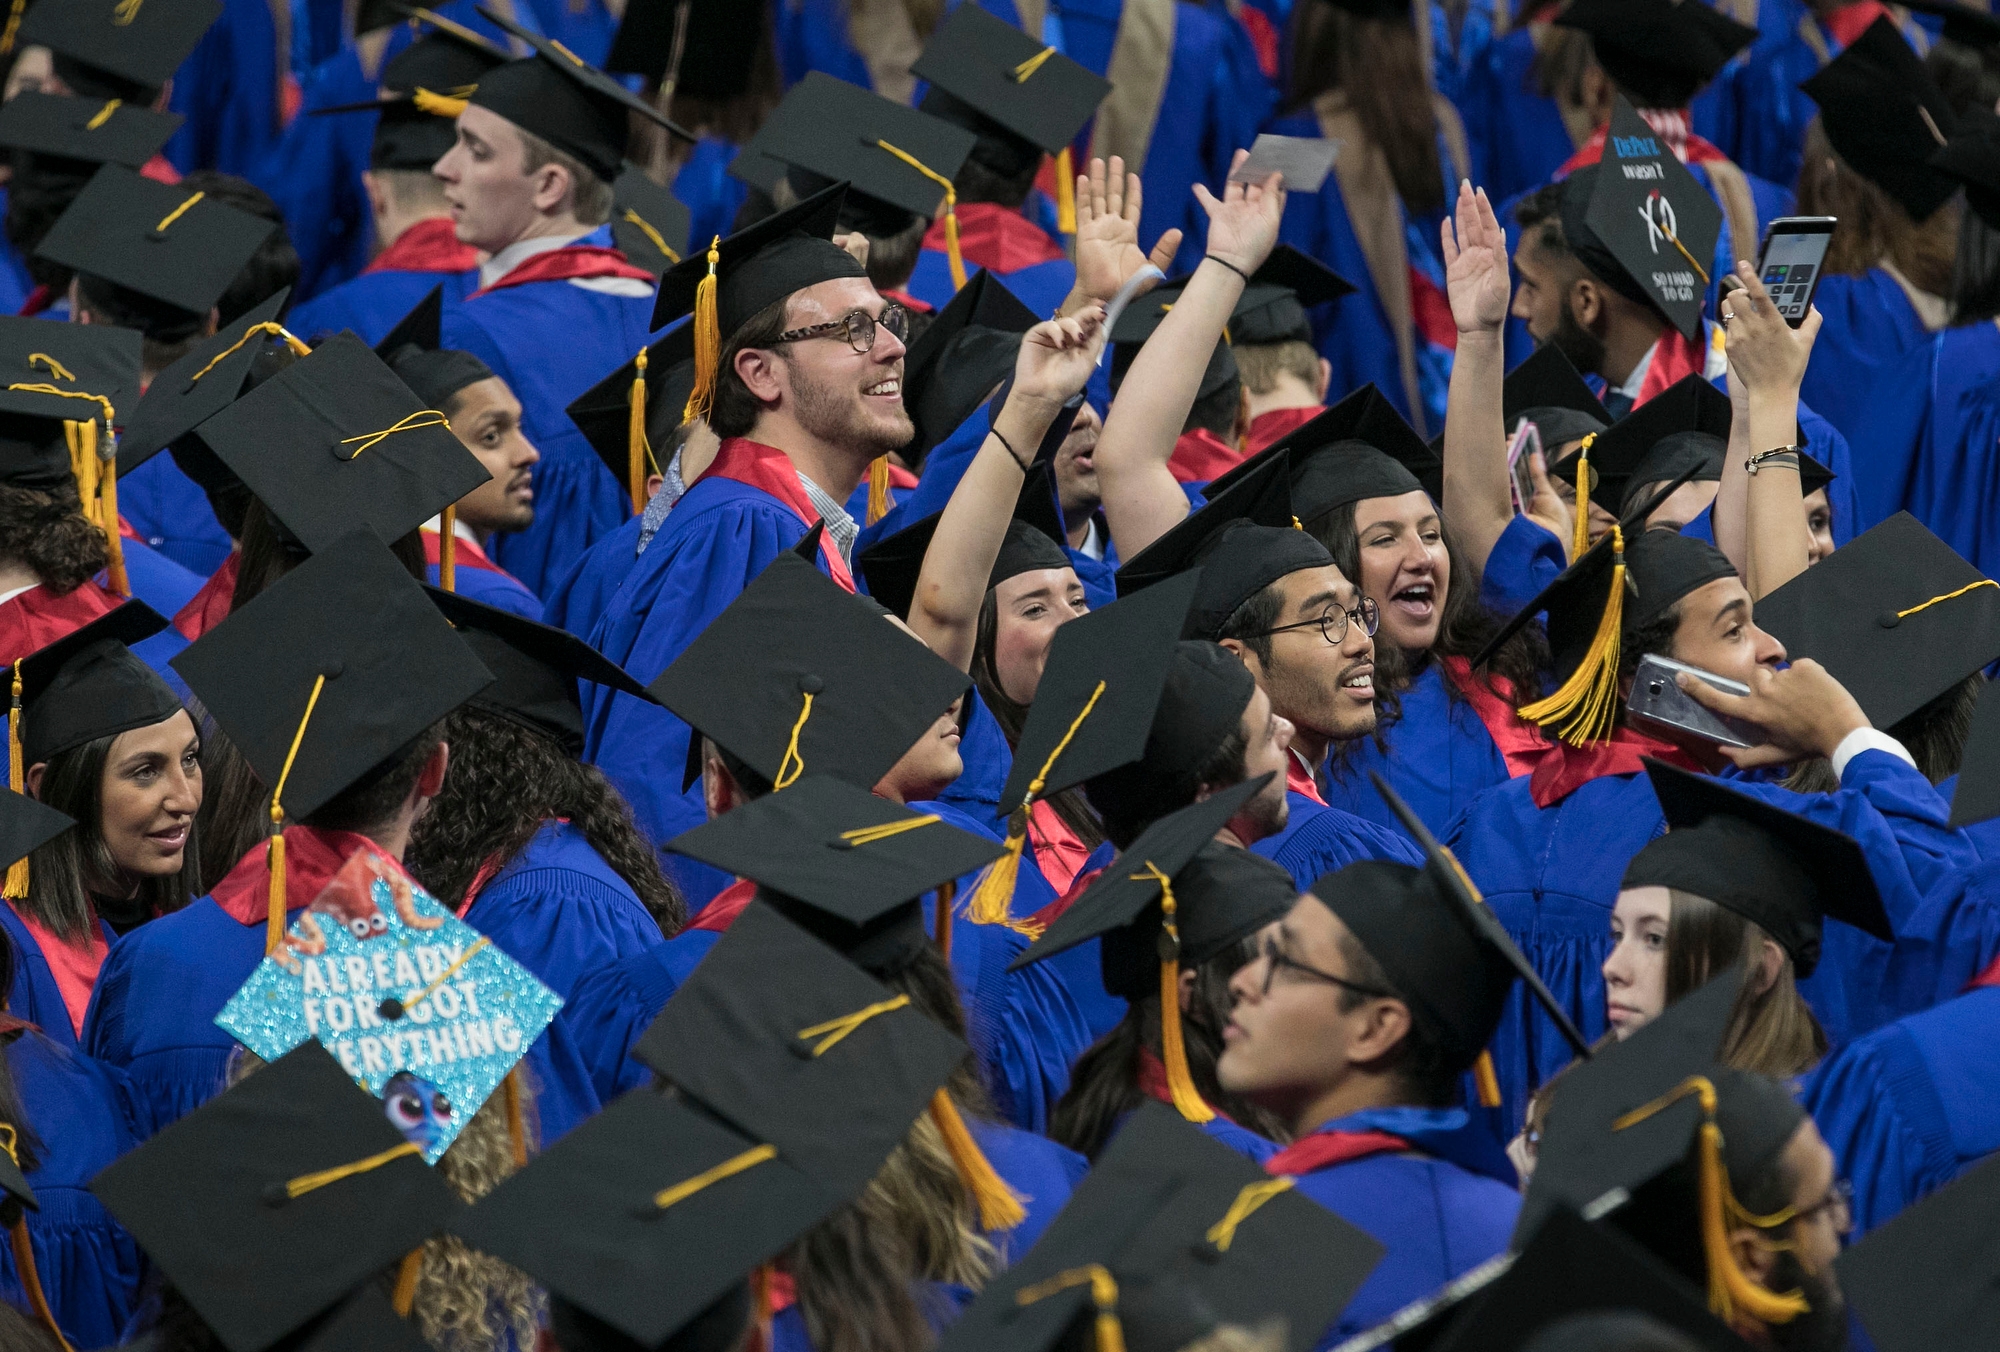 Driehaus College of Business graduates wave to friends and family members inside Wintrust Arena as they take to the floor for their commencement ceremony. (DePaul University/Jamie Moncrief)